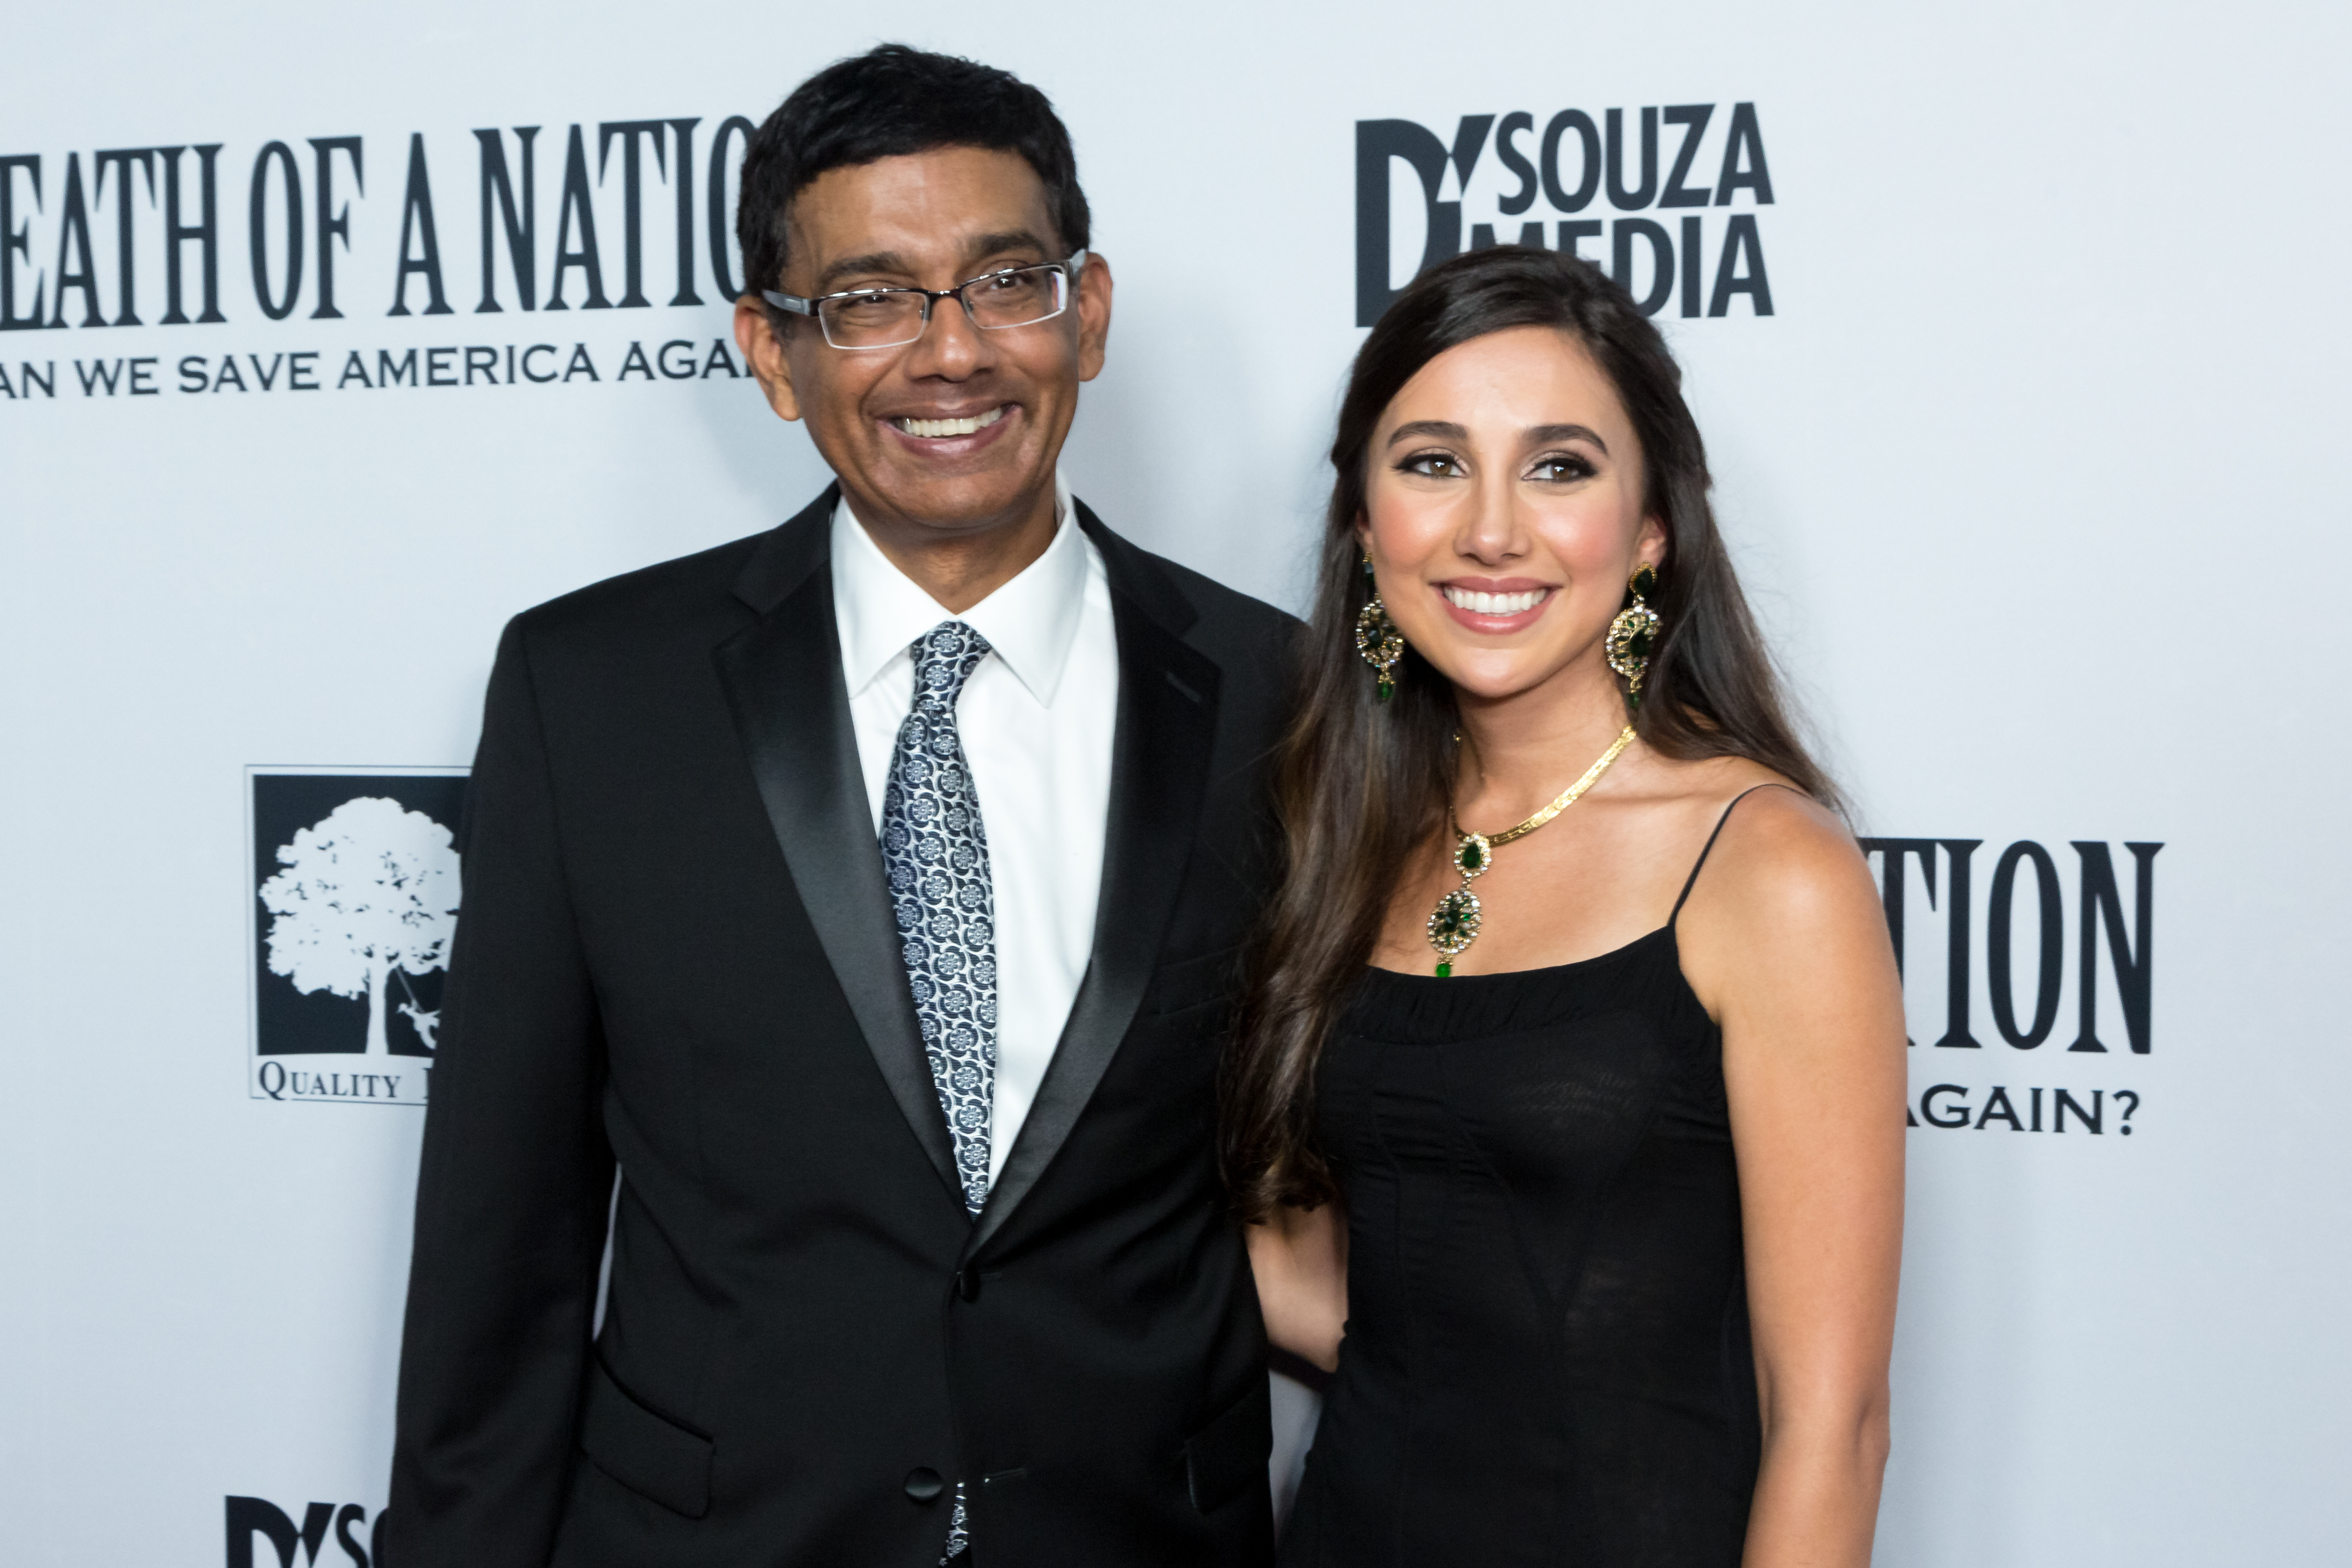 Dinesh D'Souza and Danielle D'Souza at the "Death Of A Nation" premiere a on July 31, 201,8 in Los Angeles, California. | Source: Getty Images